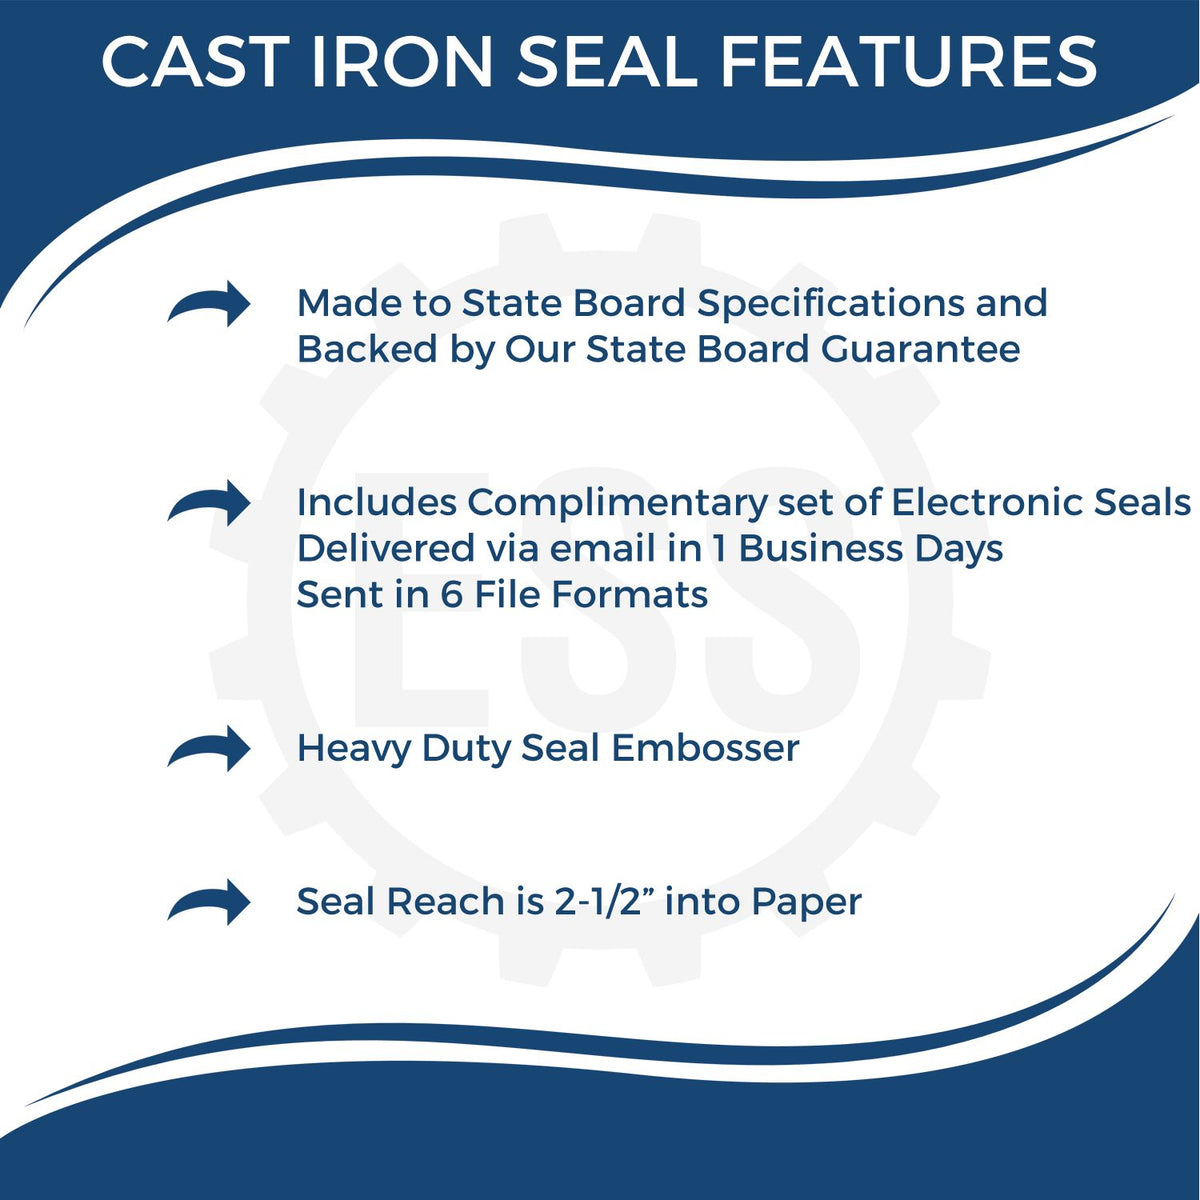 A picture of an infographic highlighting the selling points for the Heavy Duty Cast Iron Virginia Geologist Seal Embosser